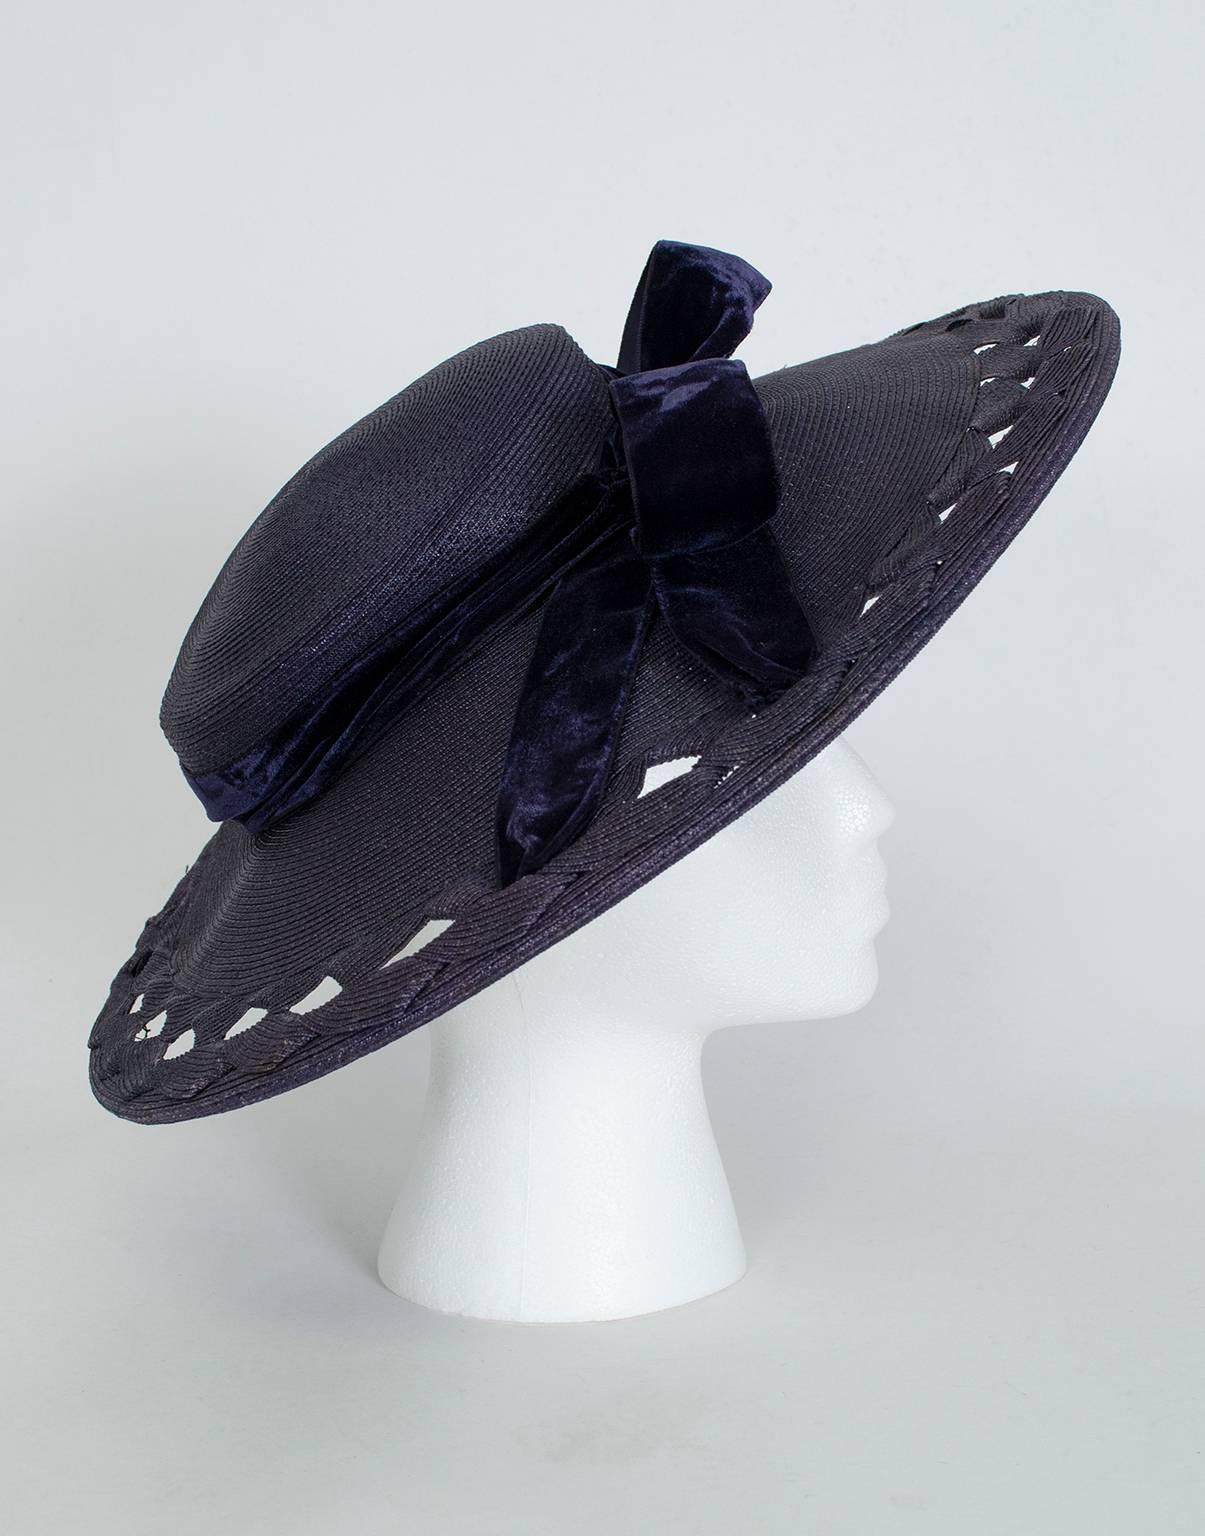 In impossible-to-find dark navy, this extra wide brimmed sun hat would a holy grail even WITHOUT the ultra-chic diamond voids in the brim. With them, it's a 